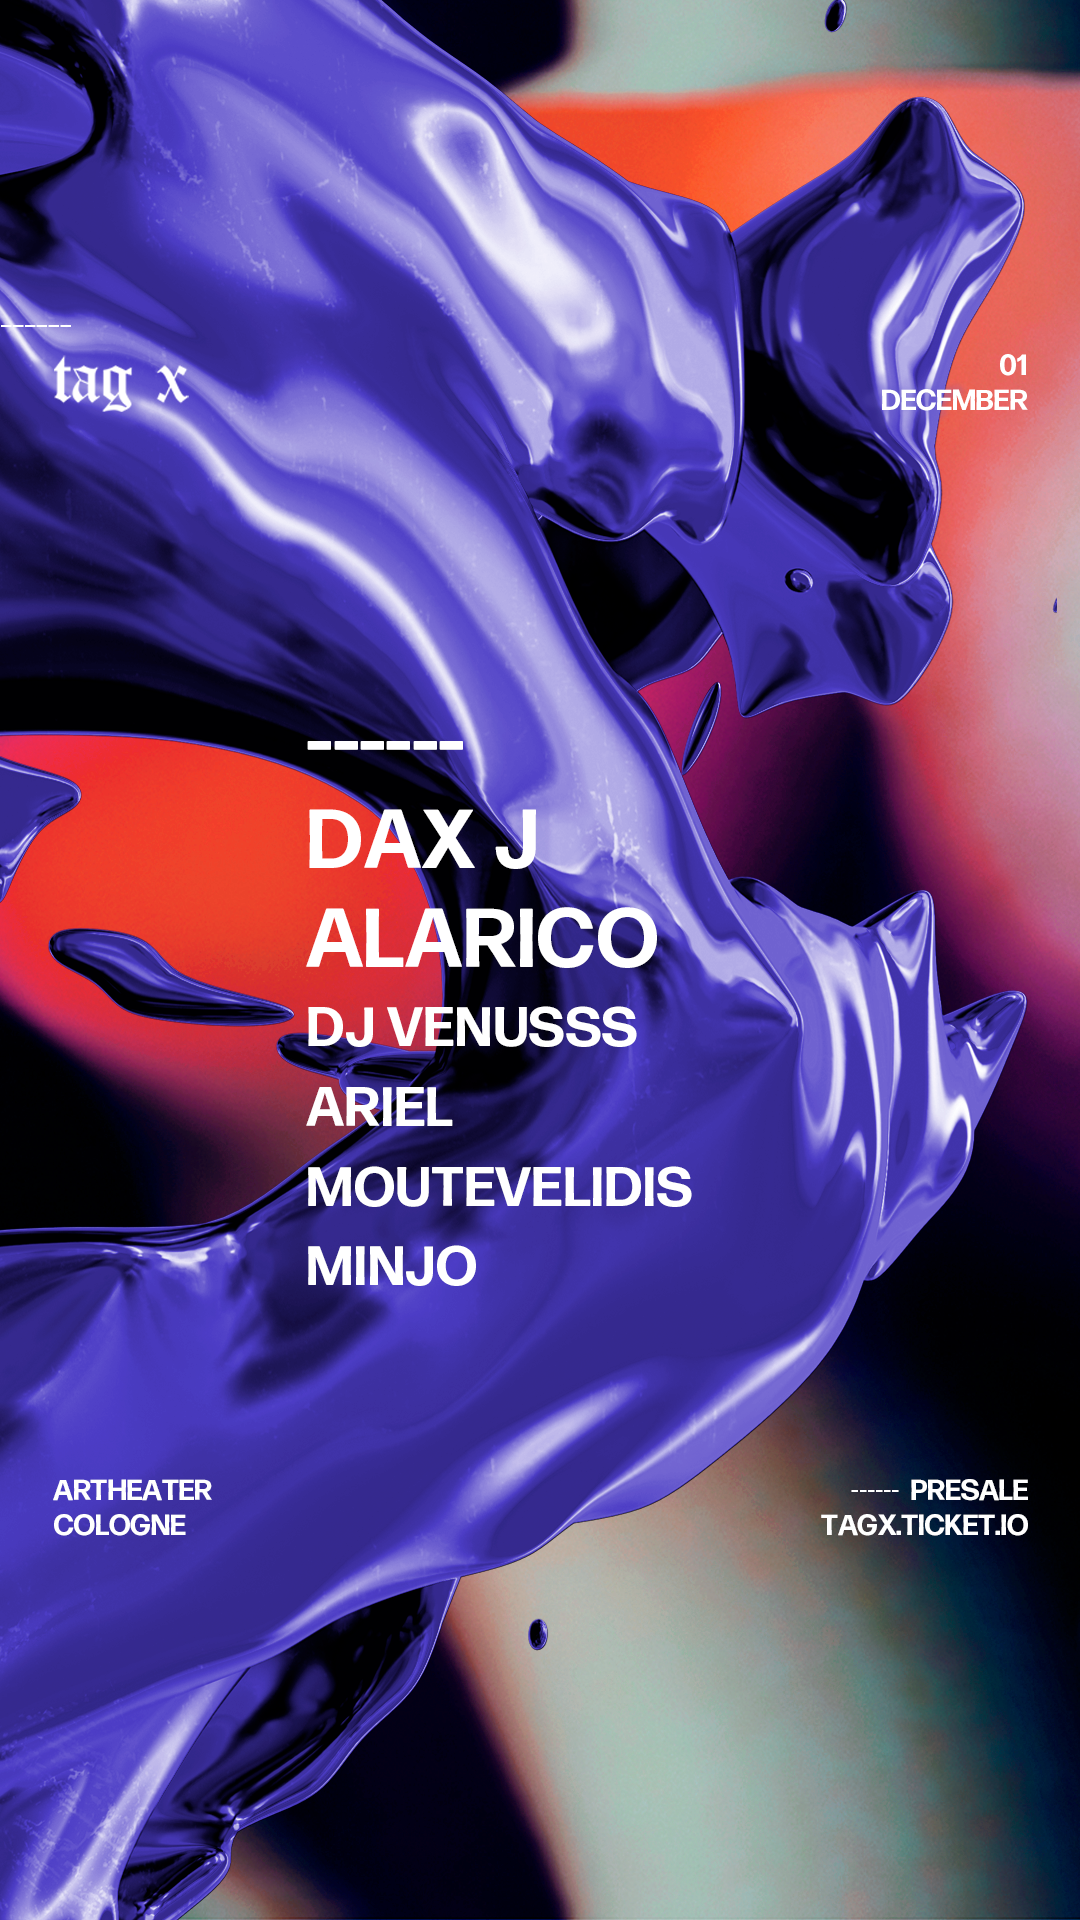 Tag X with Dax J - Alarico - Local Support - Página frontal